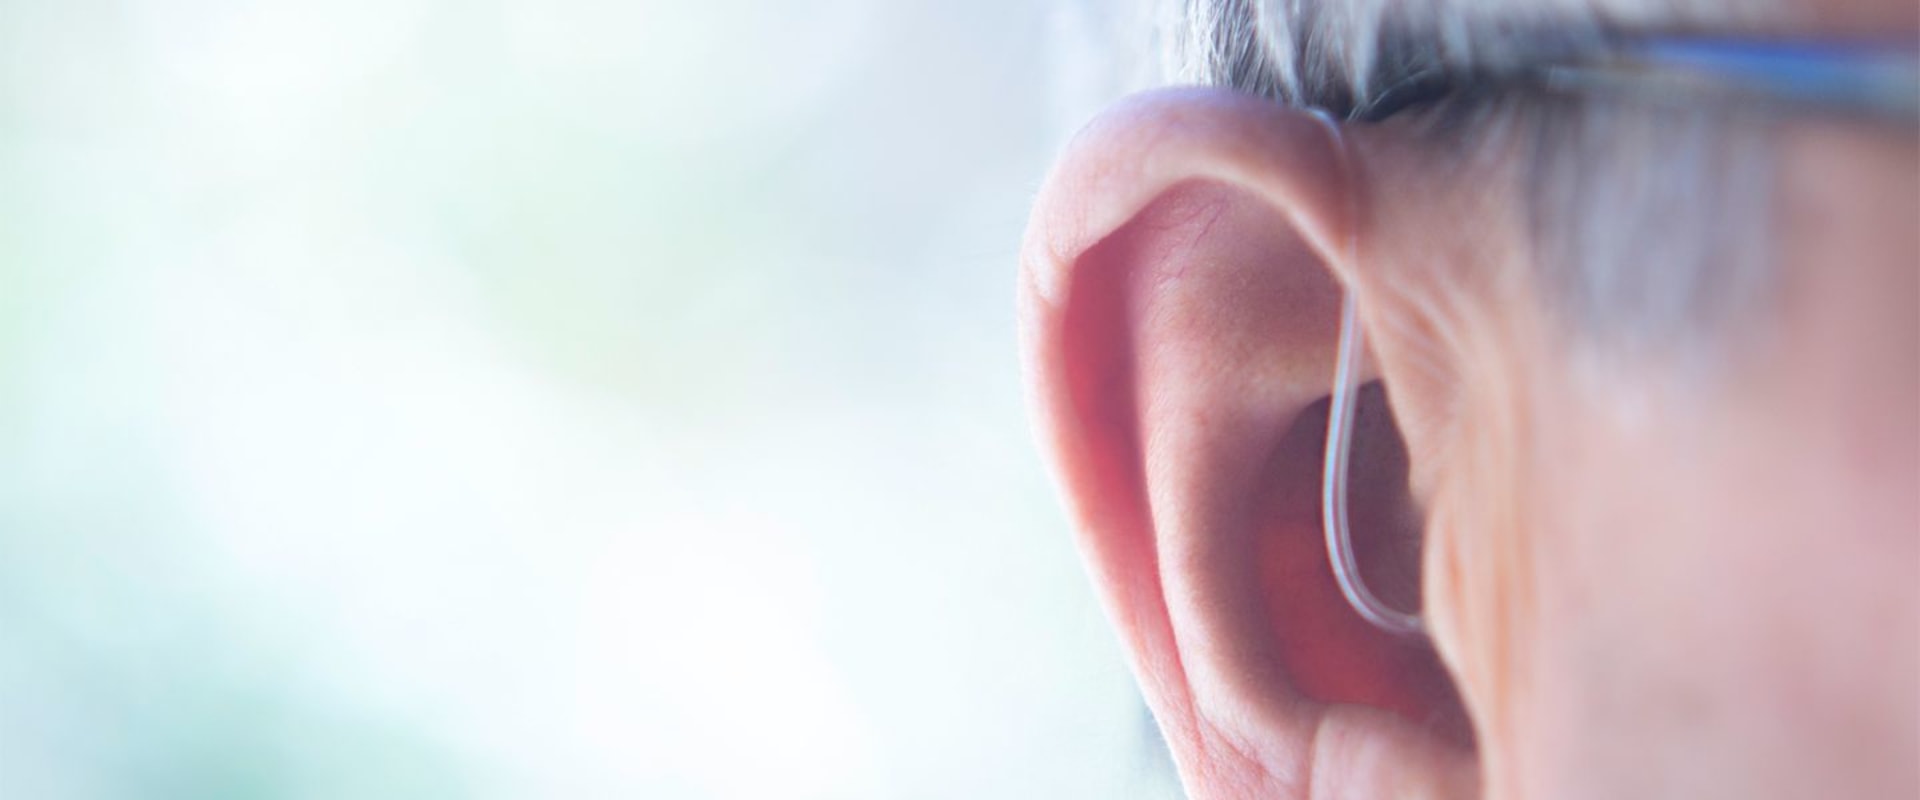 Why hearing aid is so expensive?